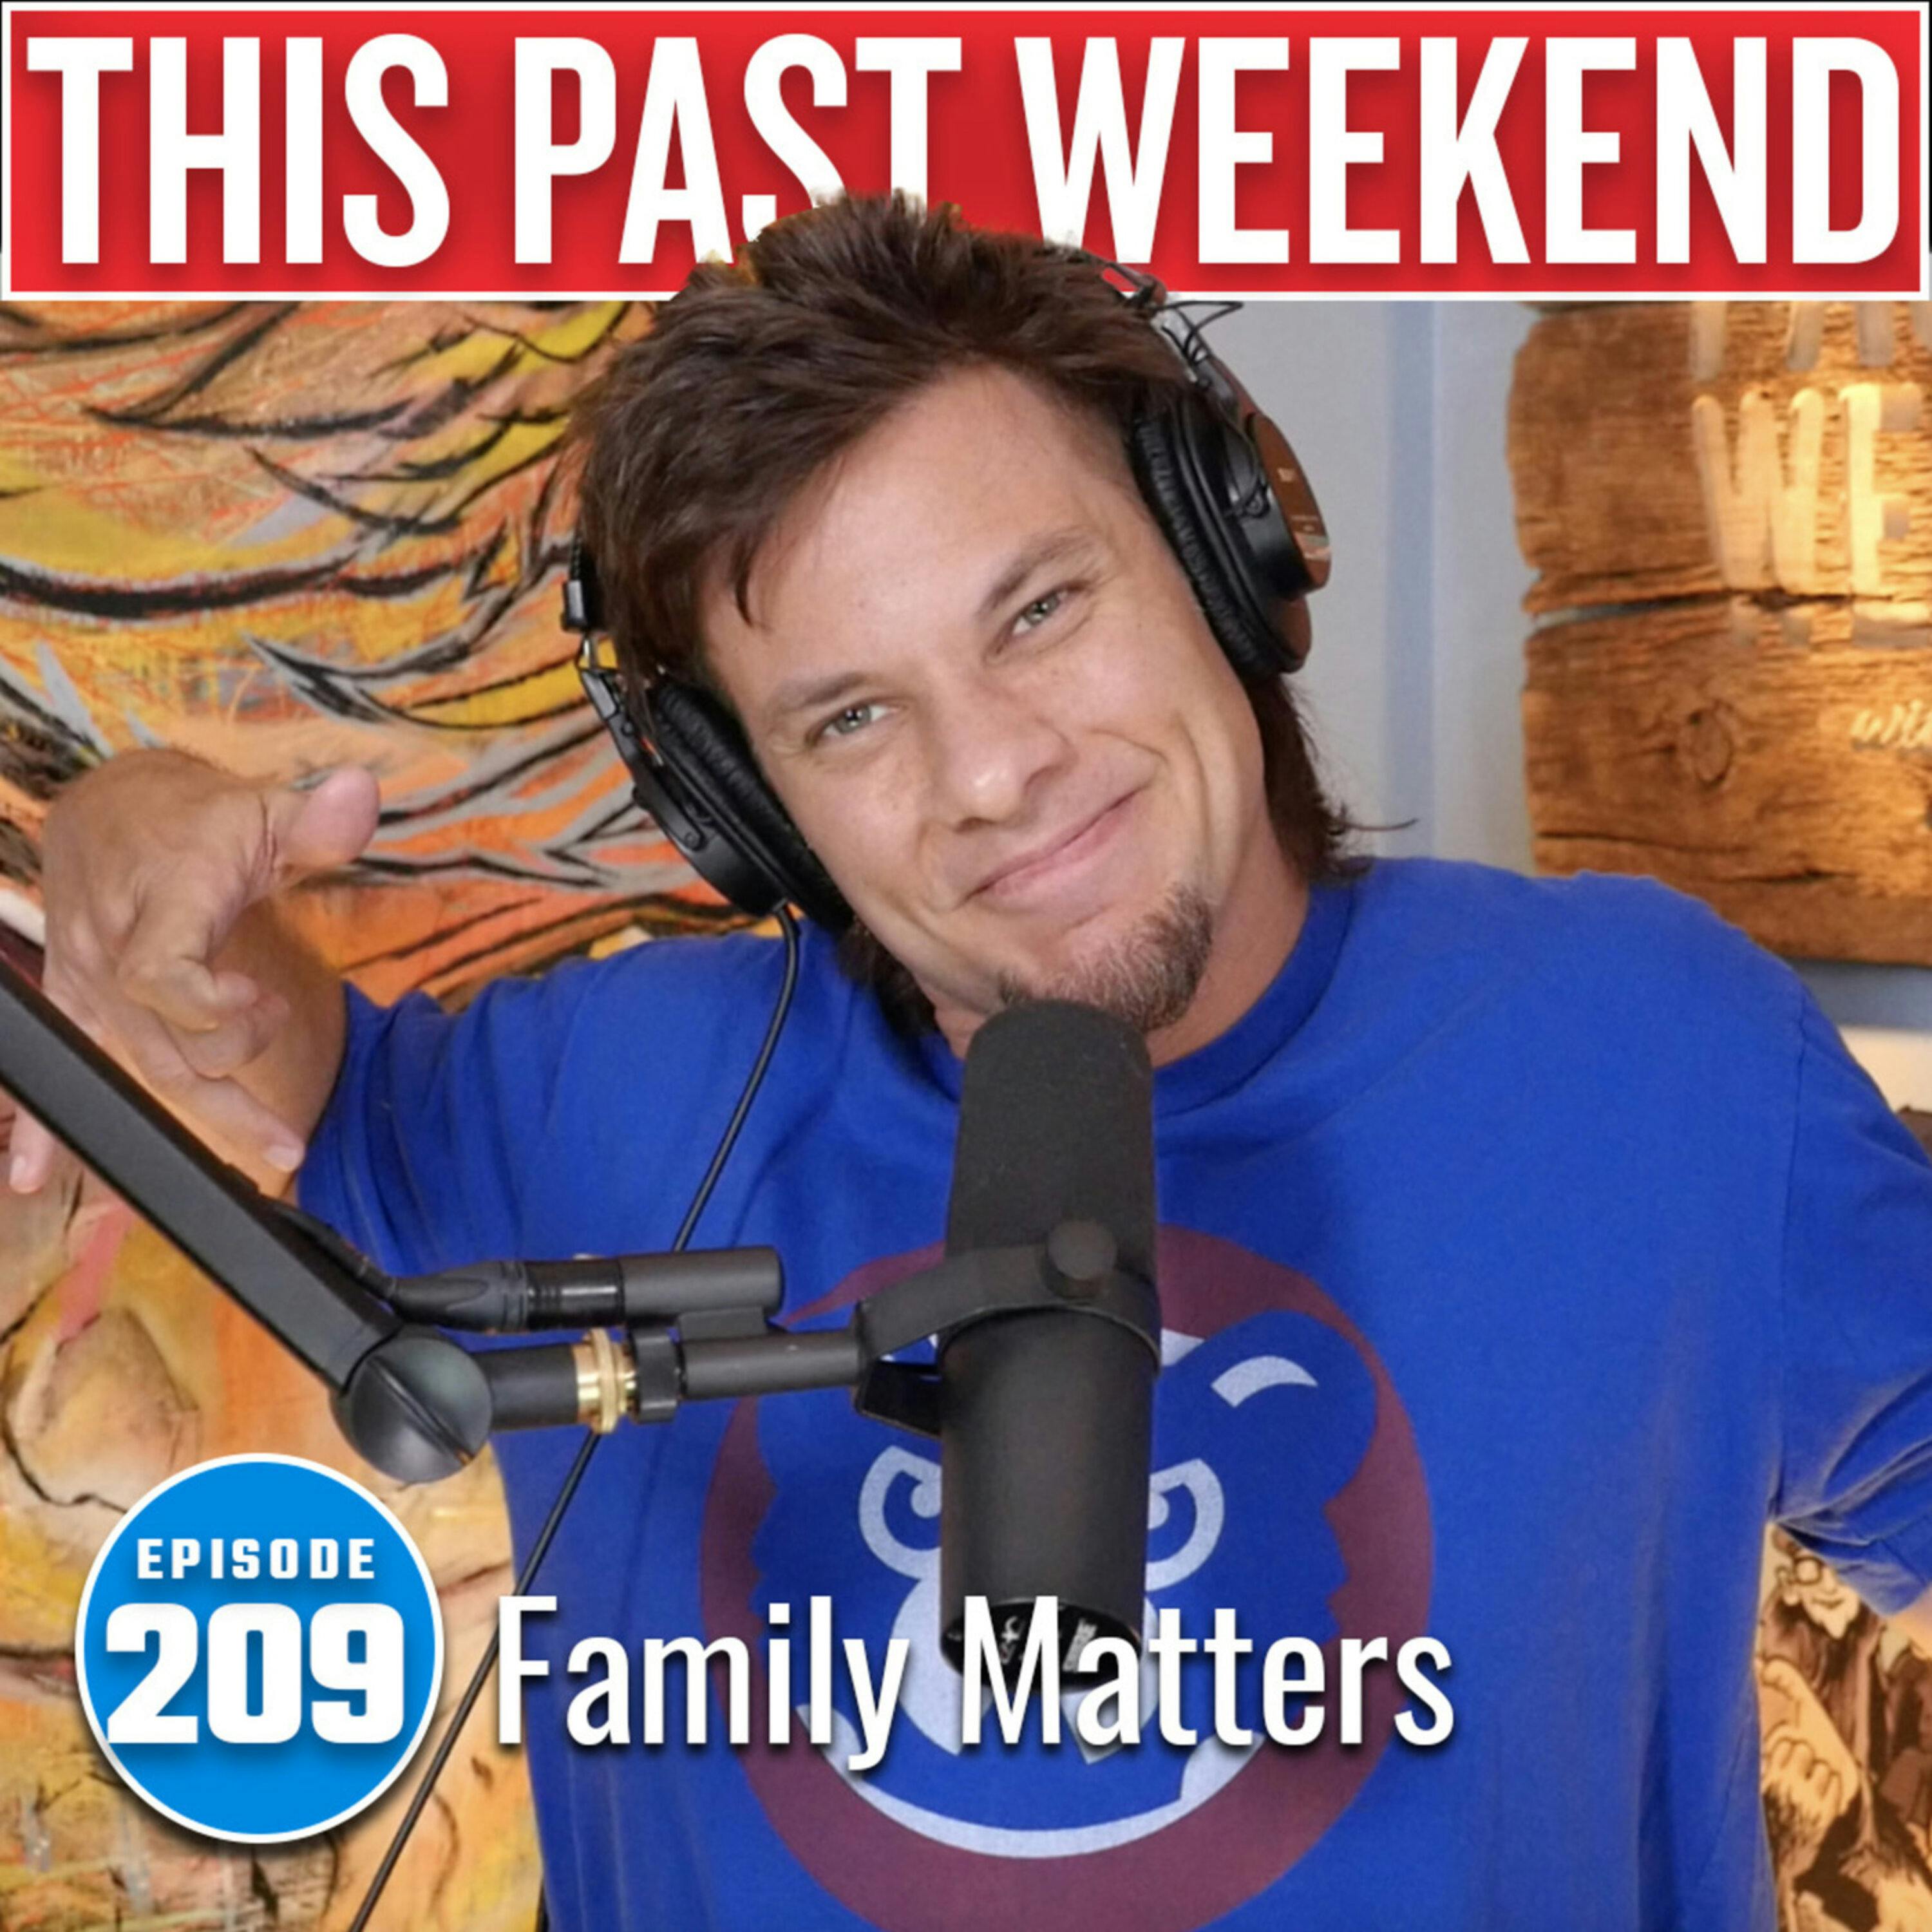 Family Matters | This Past Weekend #209 by Theo Von